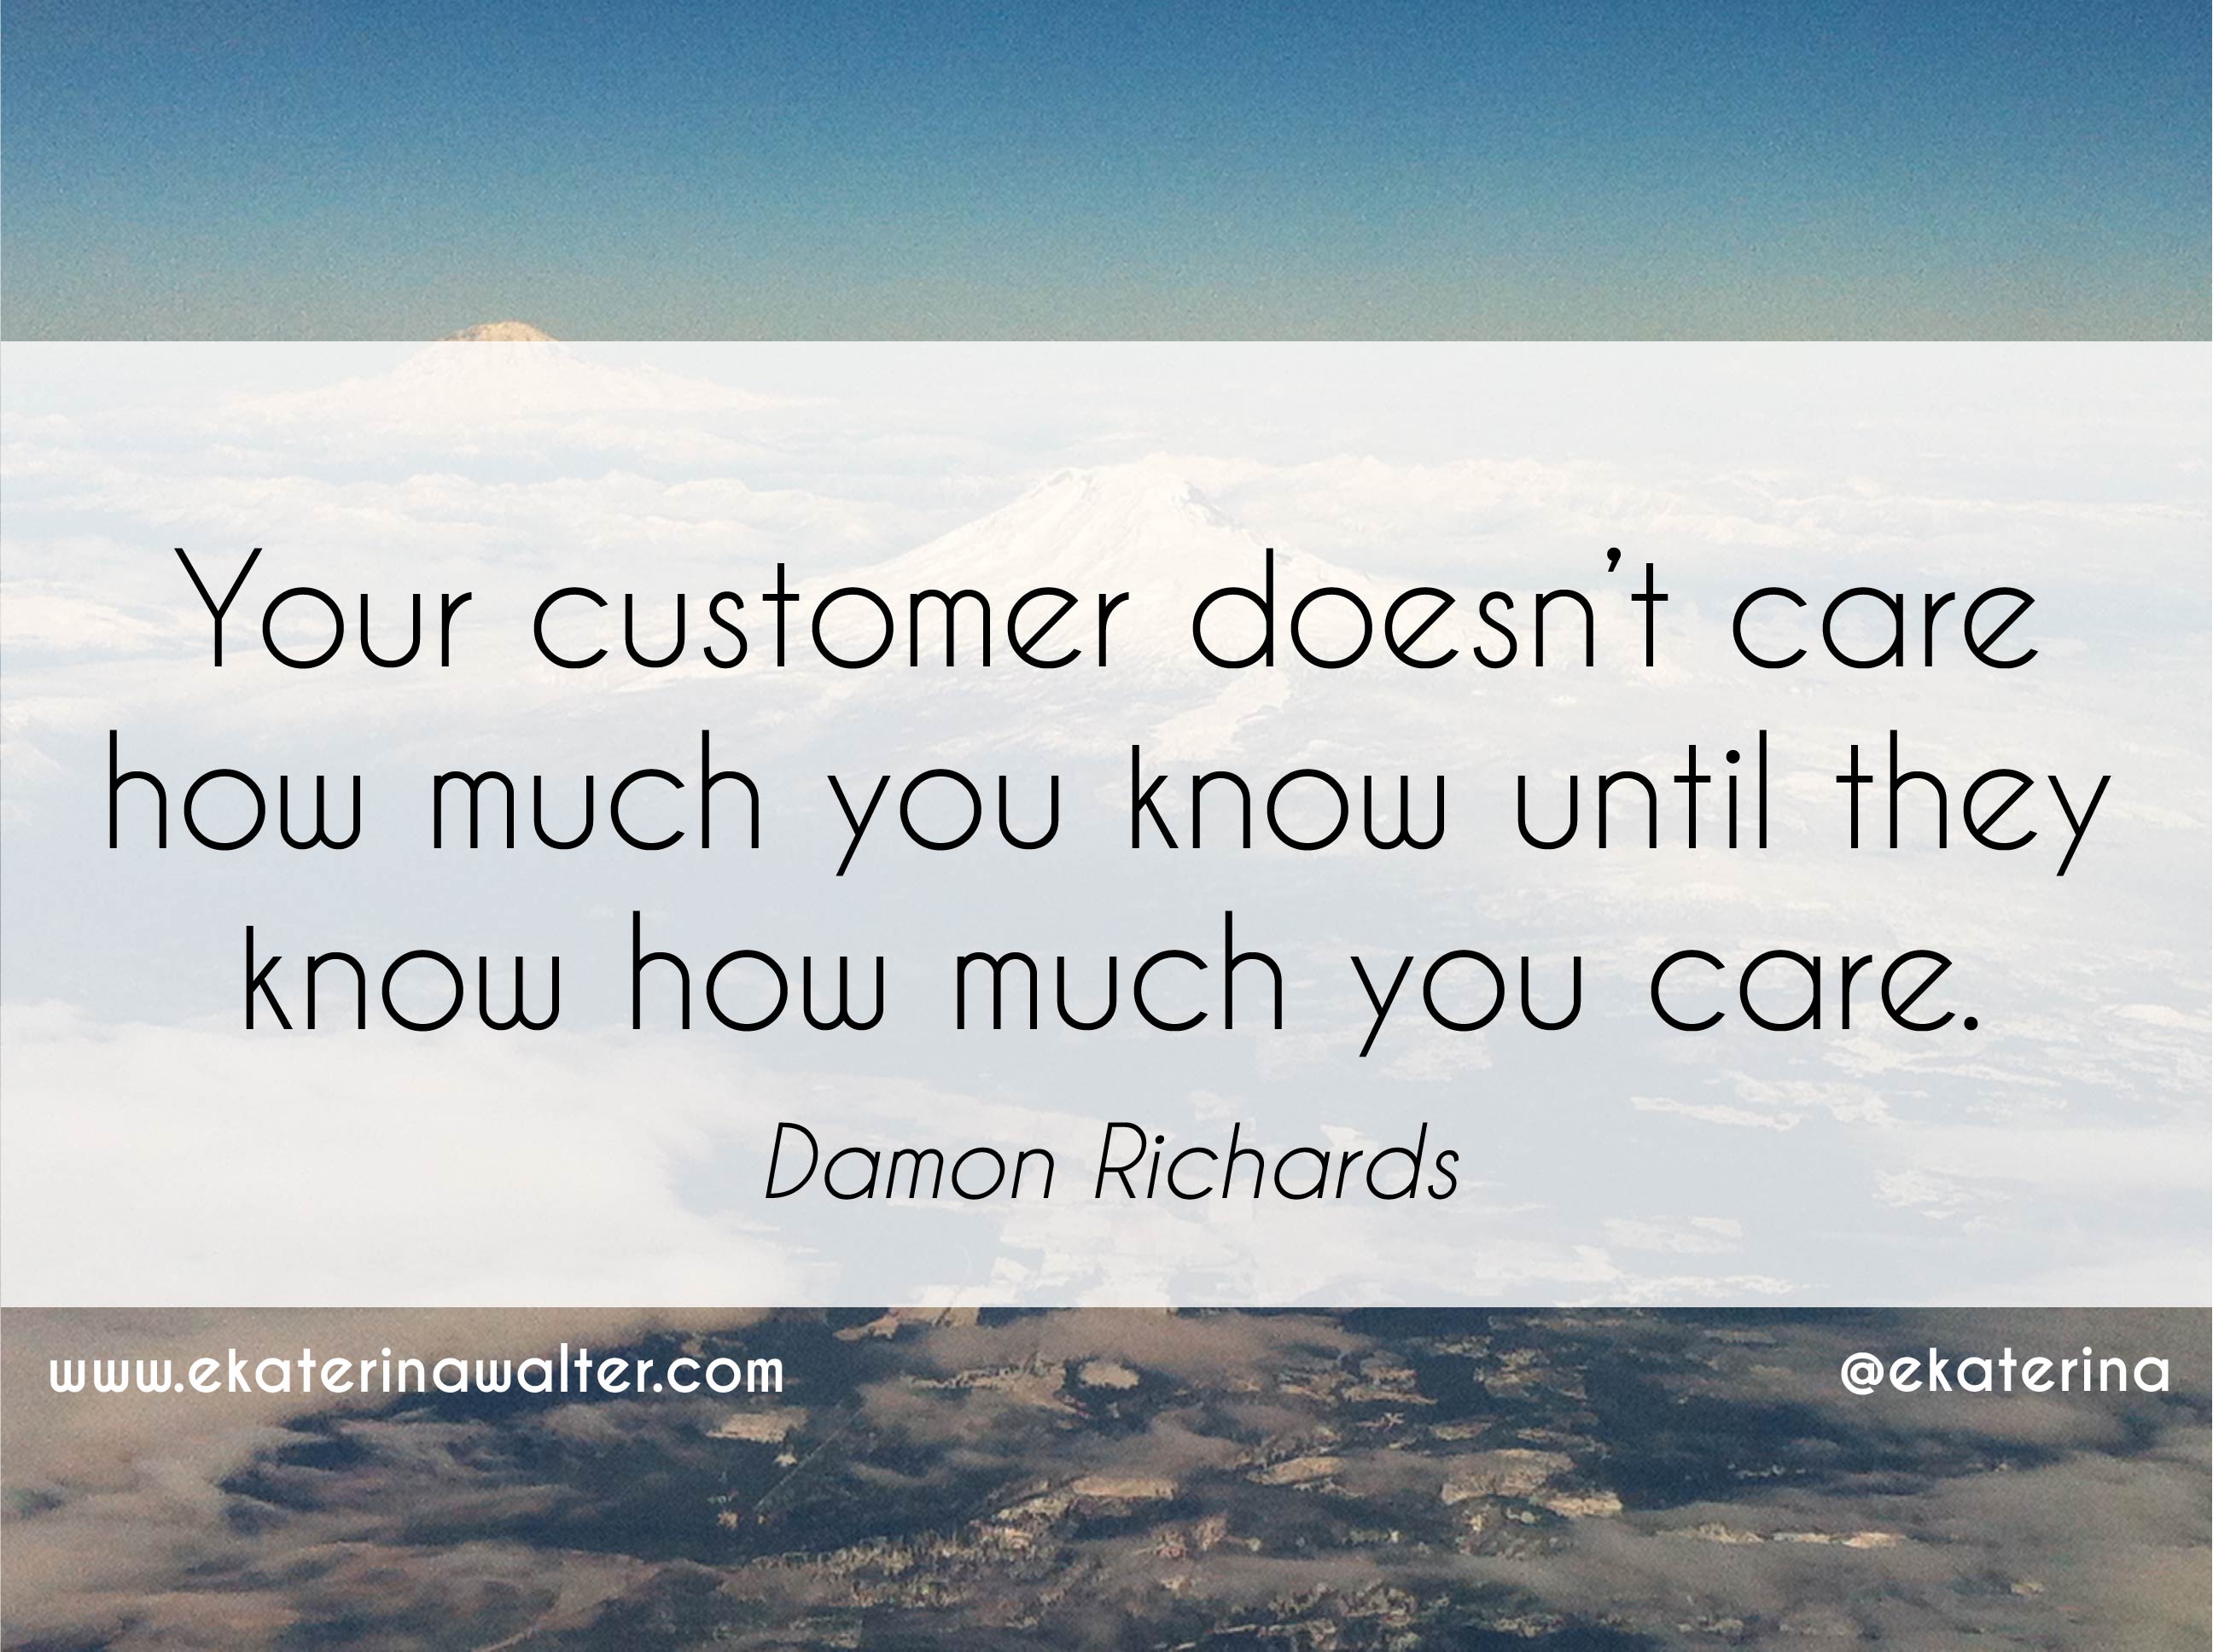 Customer Service Quotes By Famous People. QuotesGram